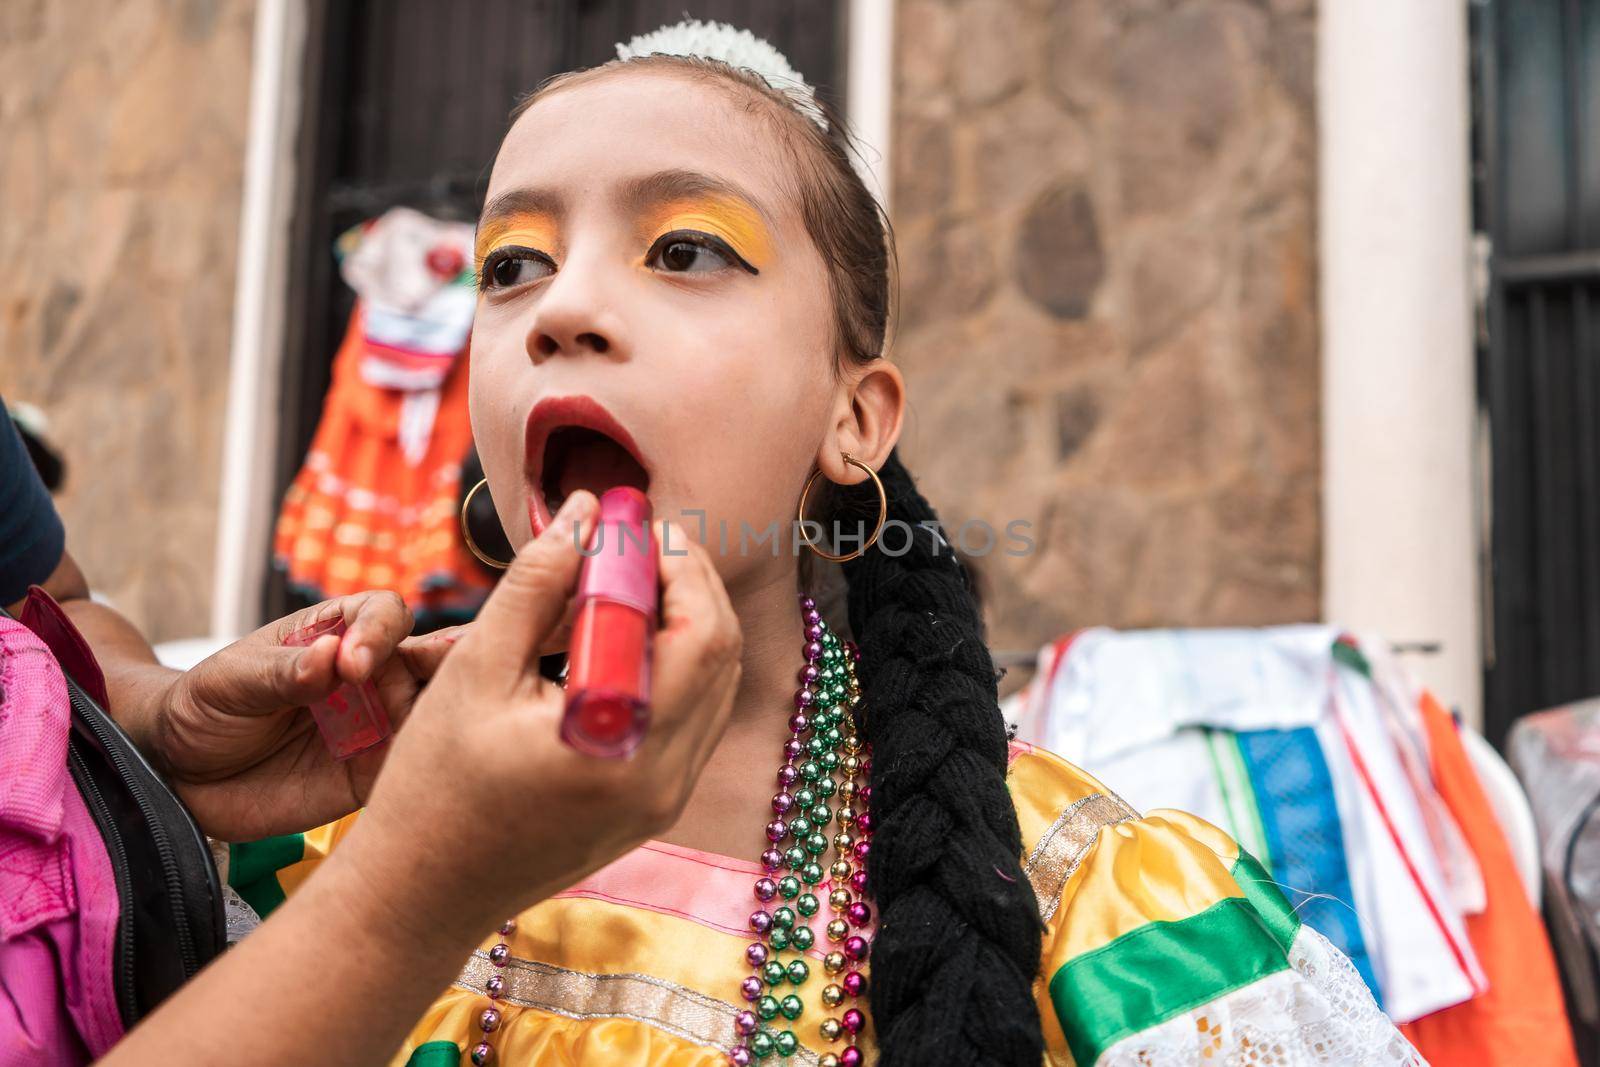 Latina girl dressed in traditional Nicaraguan clothes being made up with lipstick